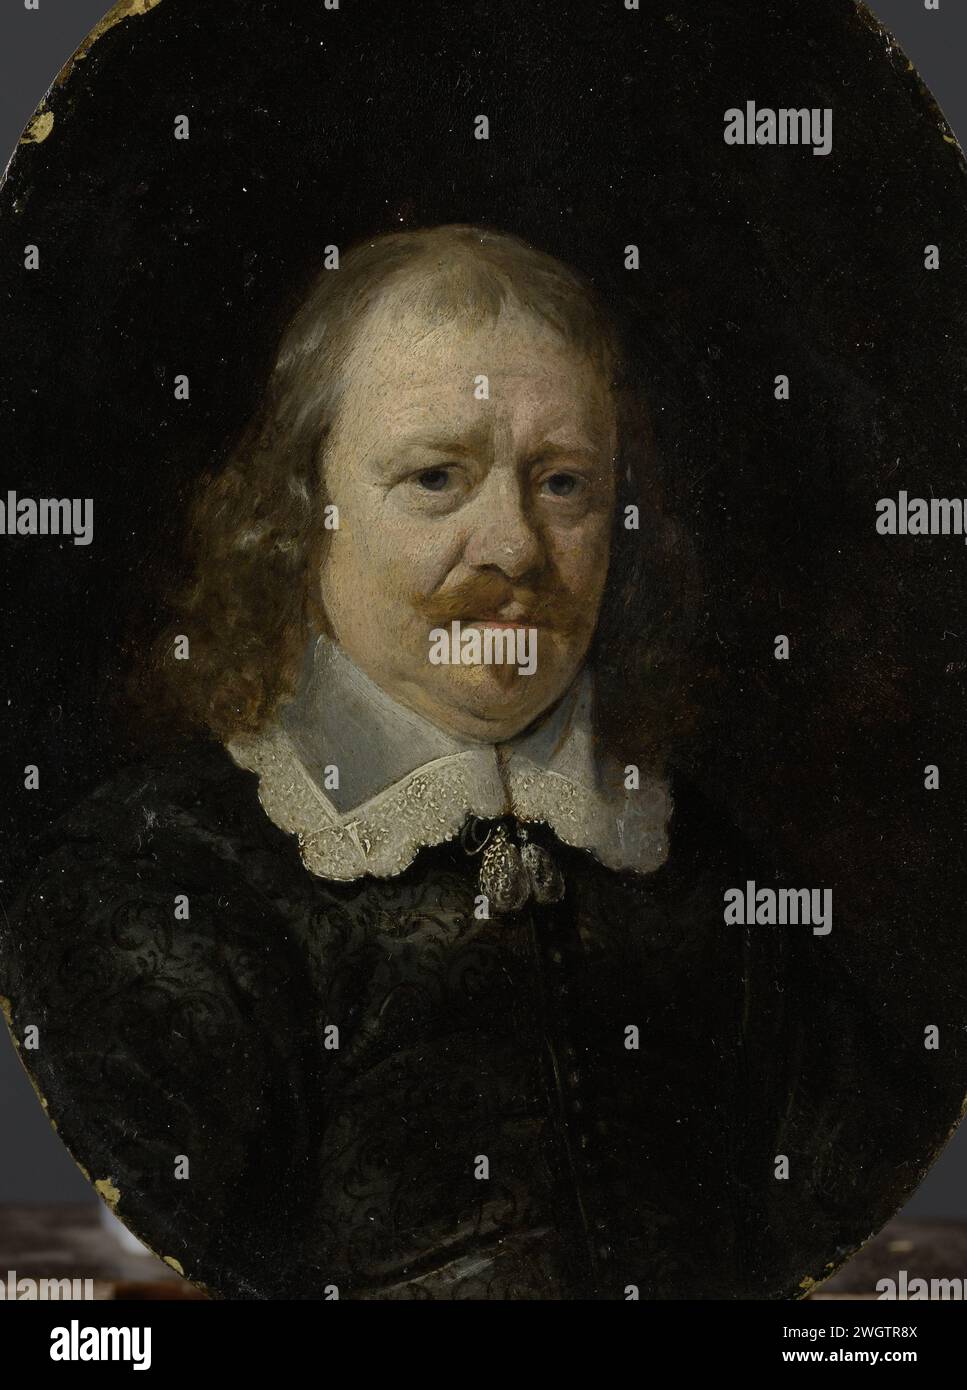 Godard van Reede (1588-1648), Lord of Nederhorst. Delegate of the Province of Utrecht at the Peace Conference at Münster (1646-48), Gerard ter Borch (II), 1646 - 1648 painting Portrait of Godard van Reede, Lord of Nederhorst. Plenipotentist of the province of Utrecht at the peace negotiation in Munster. Bust.  copper (metal). oil paint (paint)  historical persons Münster Stock Photo